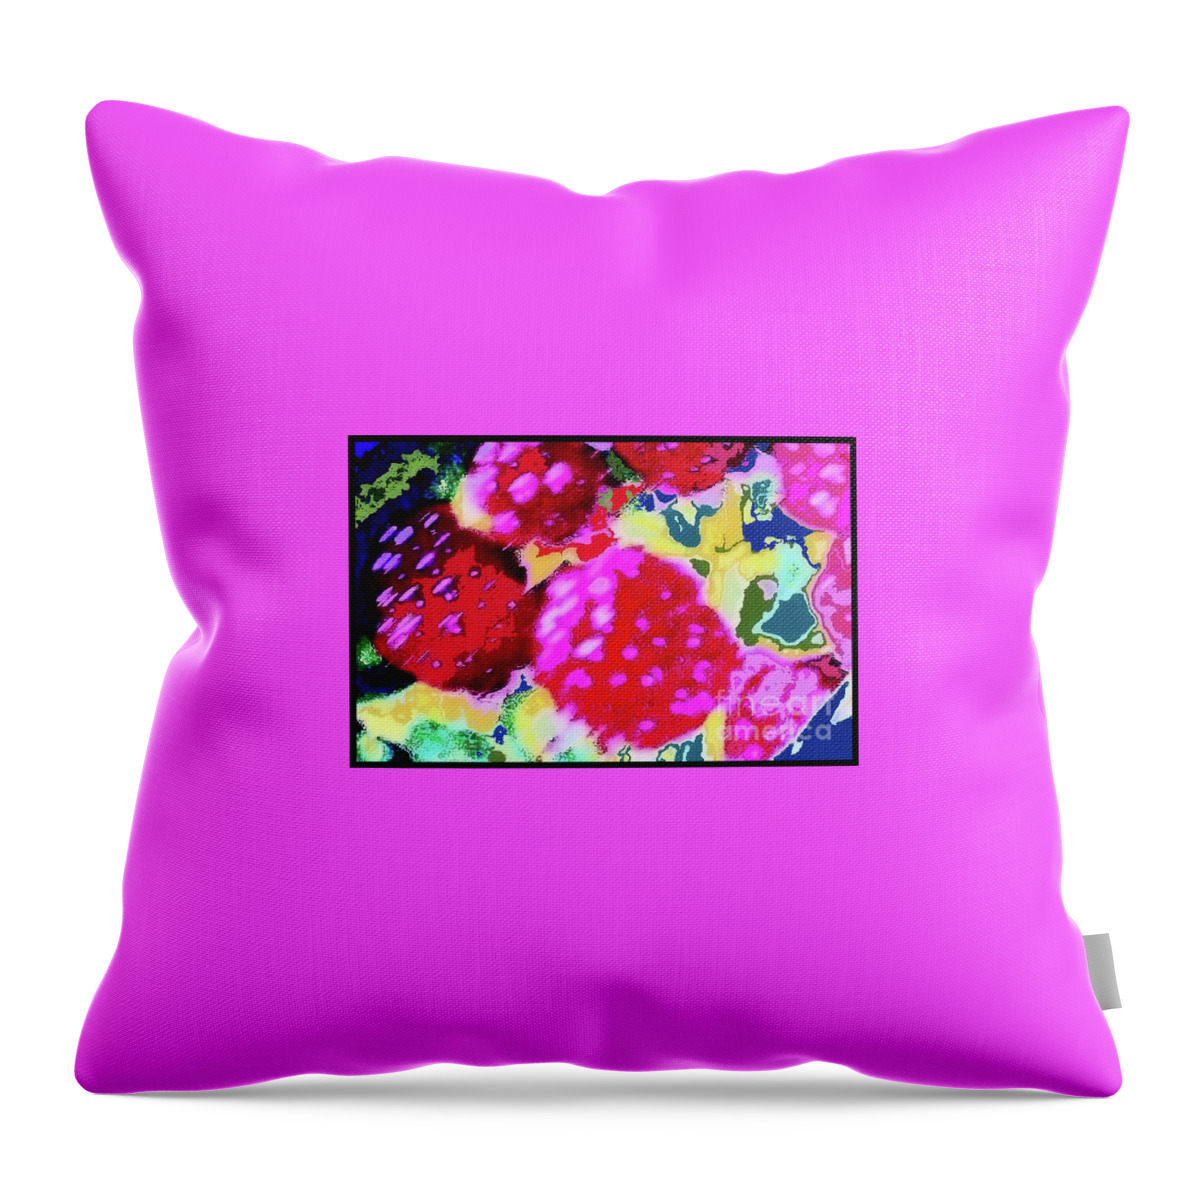  Throw Pillow featuring the photograph Raspberries by Shirley Moravec